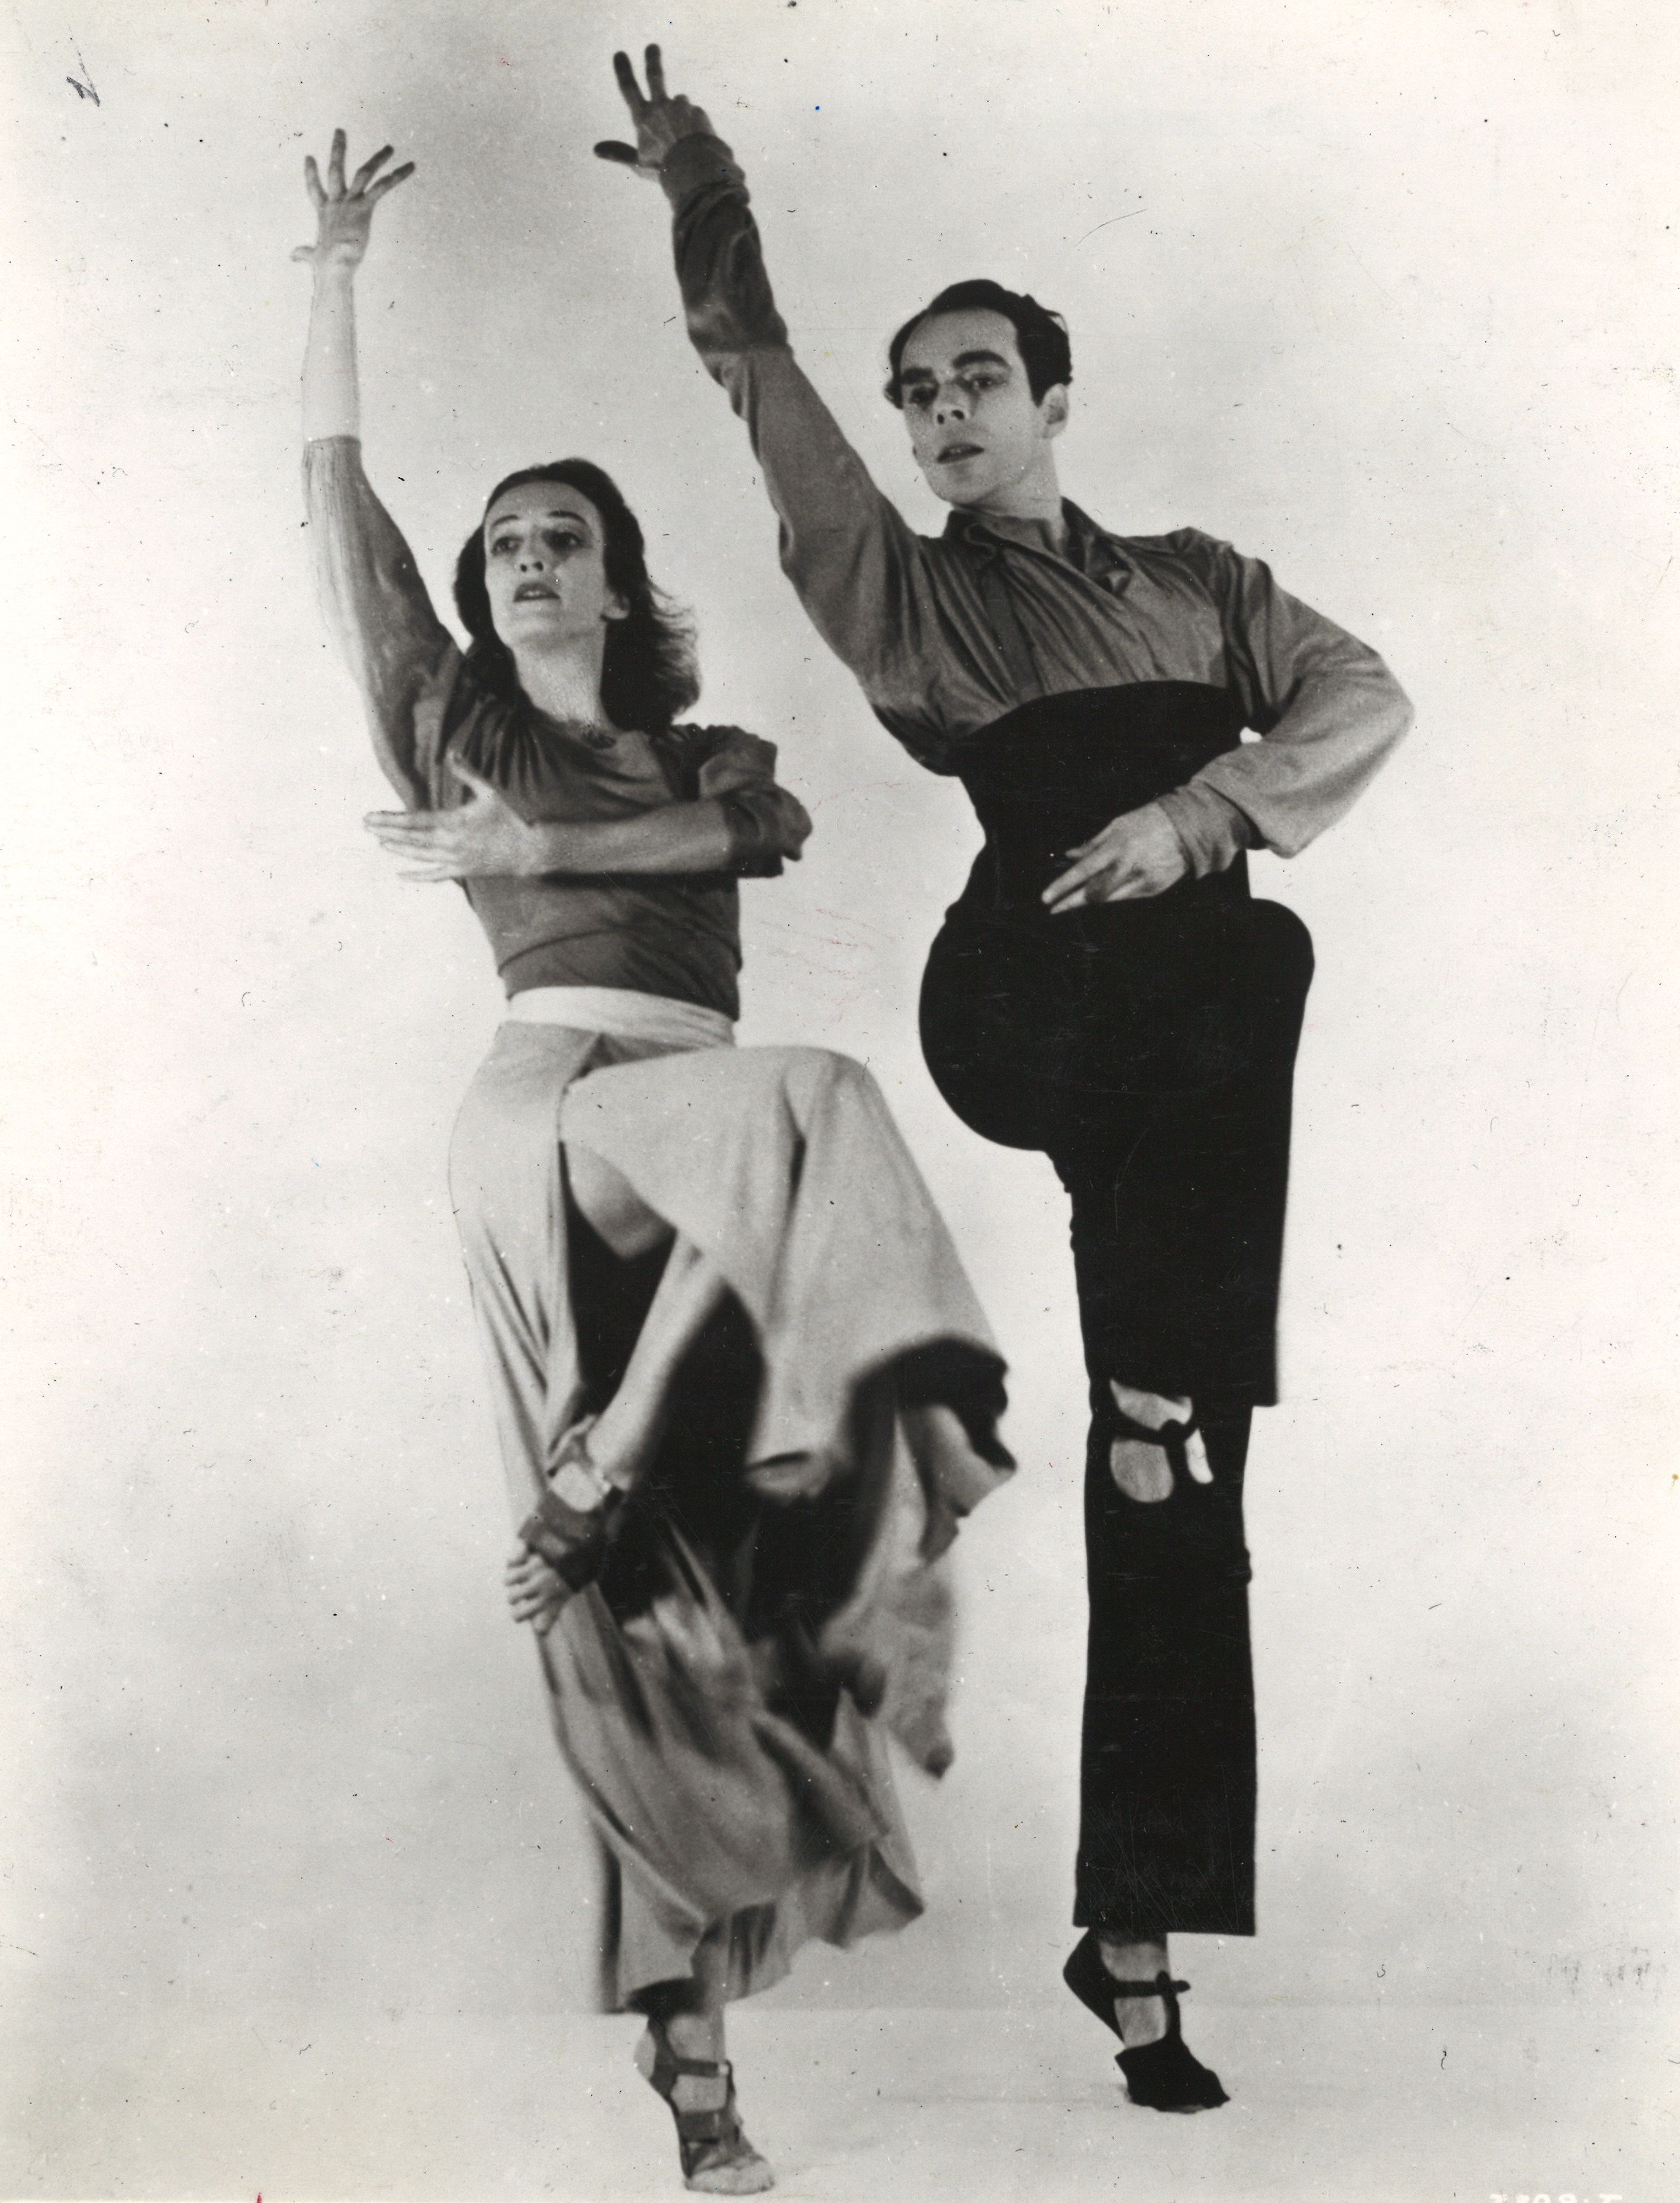 Humphrey and Weidman pose on relevu00e9, working legs raised to parallel retiru00e9, one arm raised overhead and slightly behind, opposite arms wrapping across their torsos